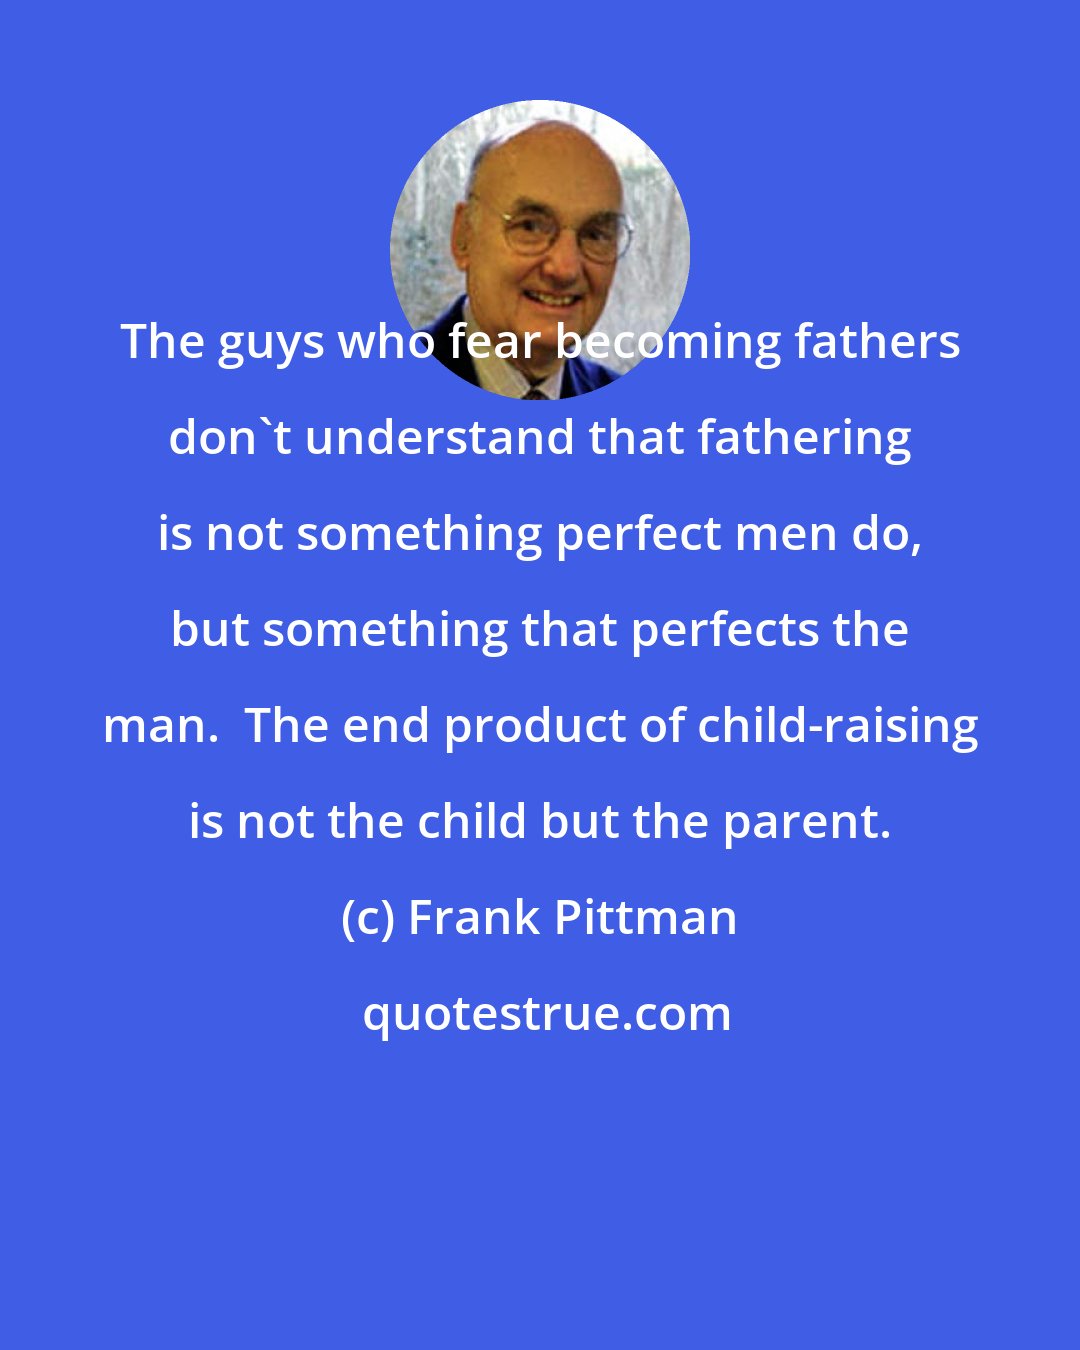 Frank Pittman: The guys who fear becoming fathers don't understand that fathering is not something perfect men do, but something that perfects the man.  The end product of child-raising is not the child but the parent.